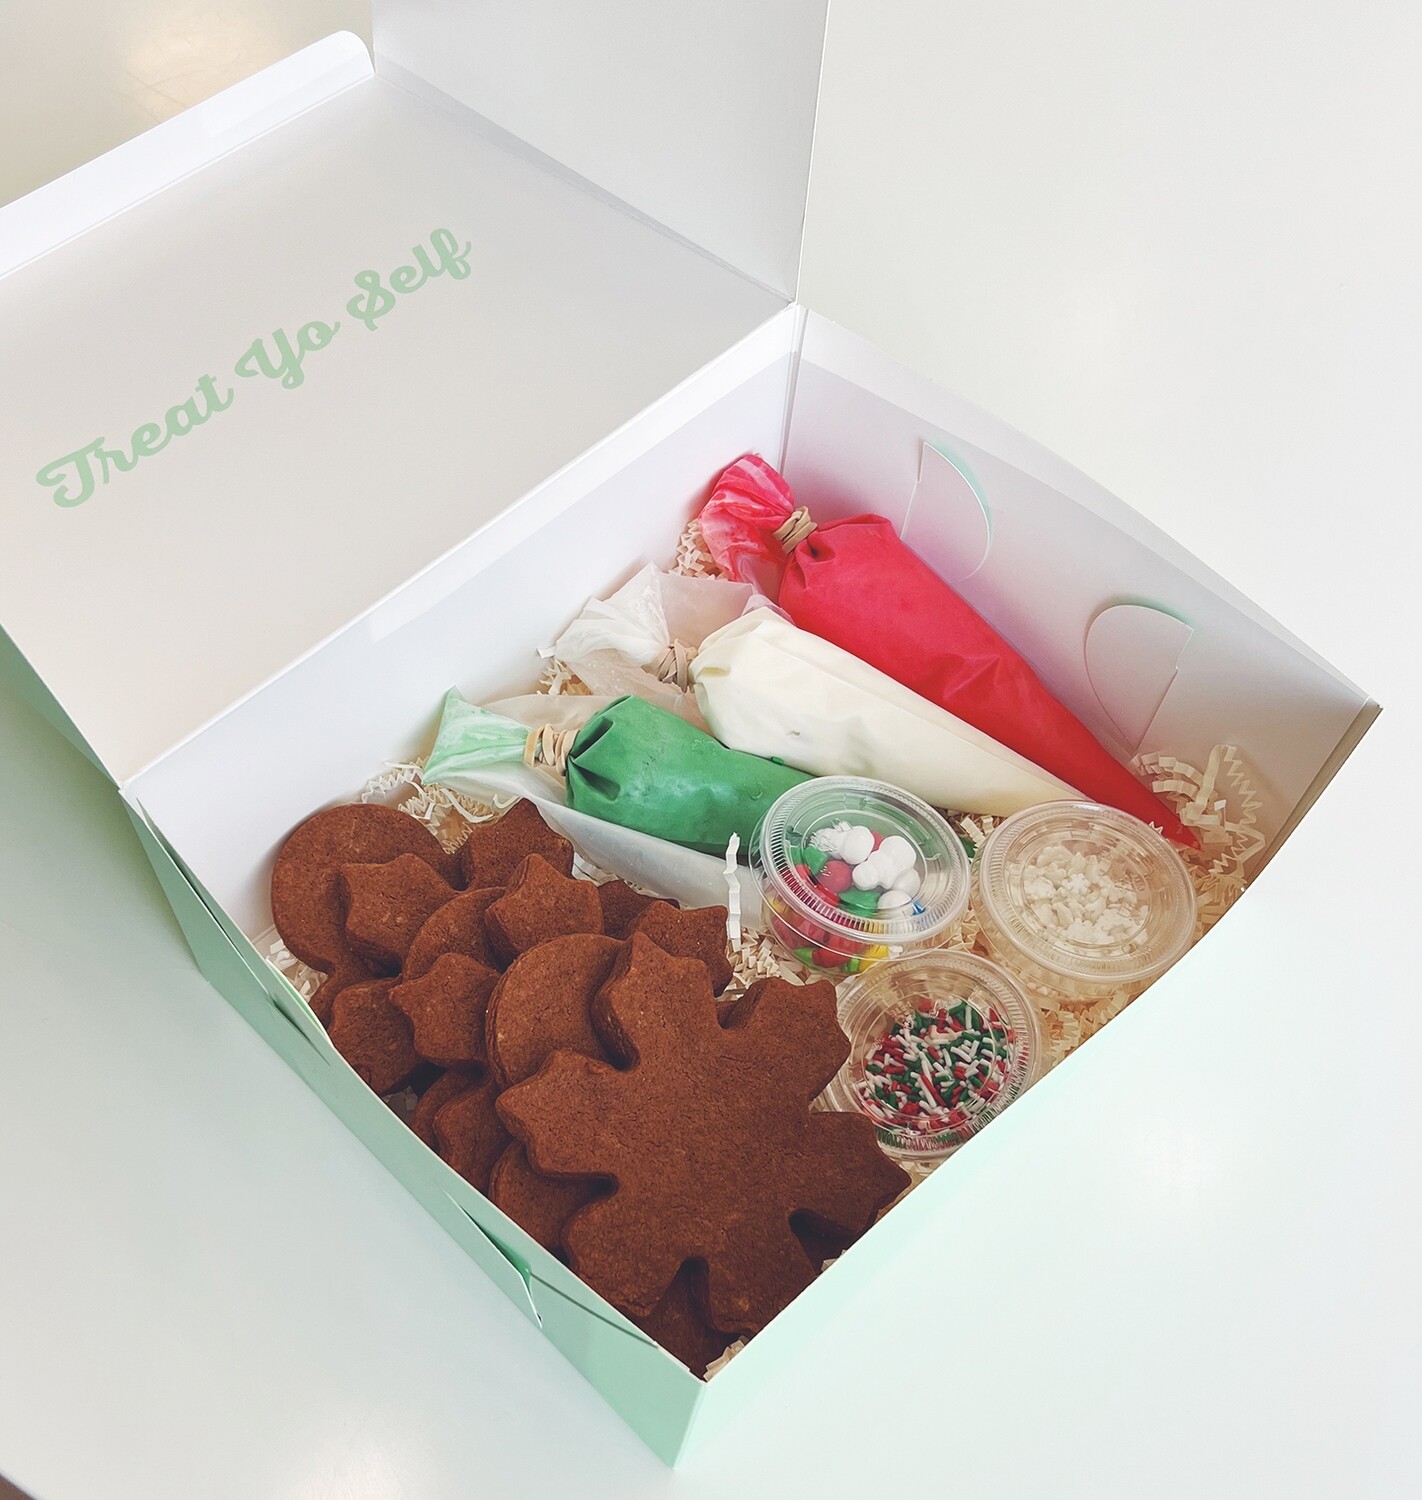 Gingerbread Cookie Decorating Kit